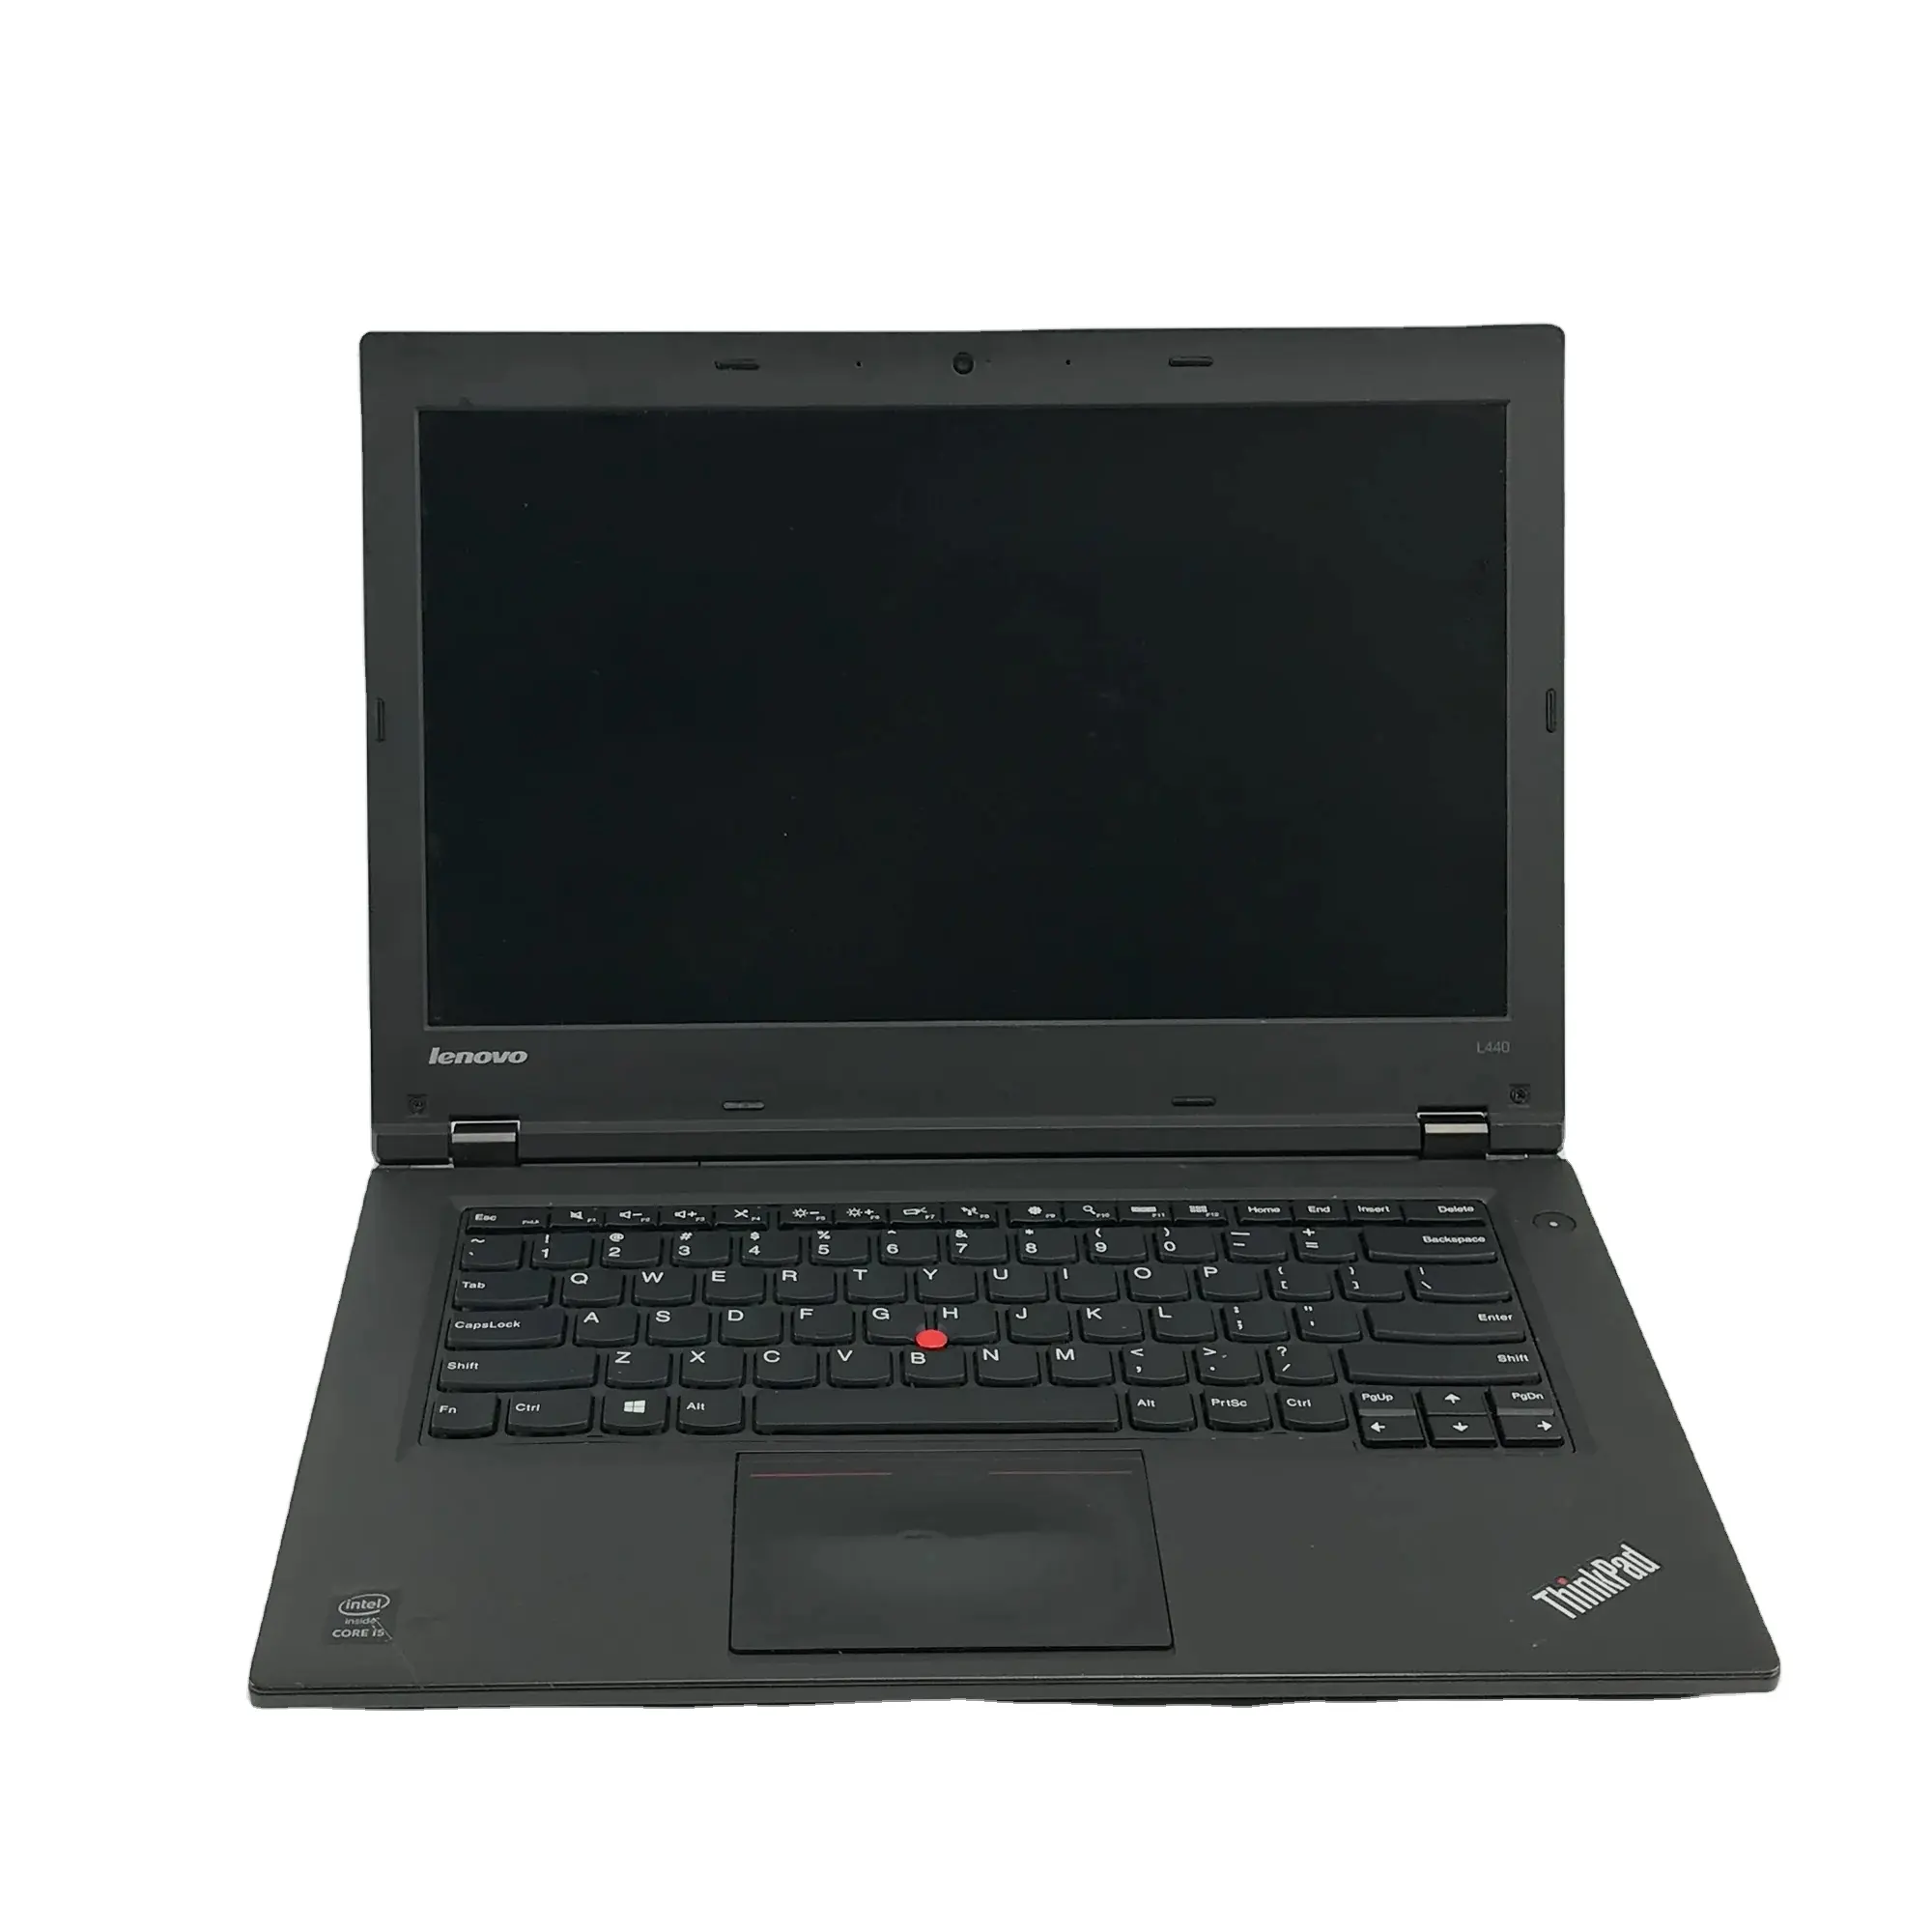 Best Conditioned ThinkPad L440 14" i5-4200M 2.6GHz 4GB RAM 500GB HDD Laptops Ideal for Best Computing Options from US